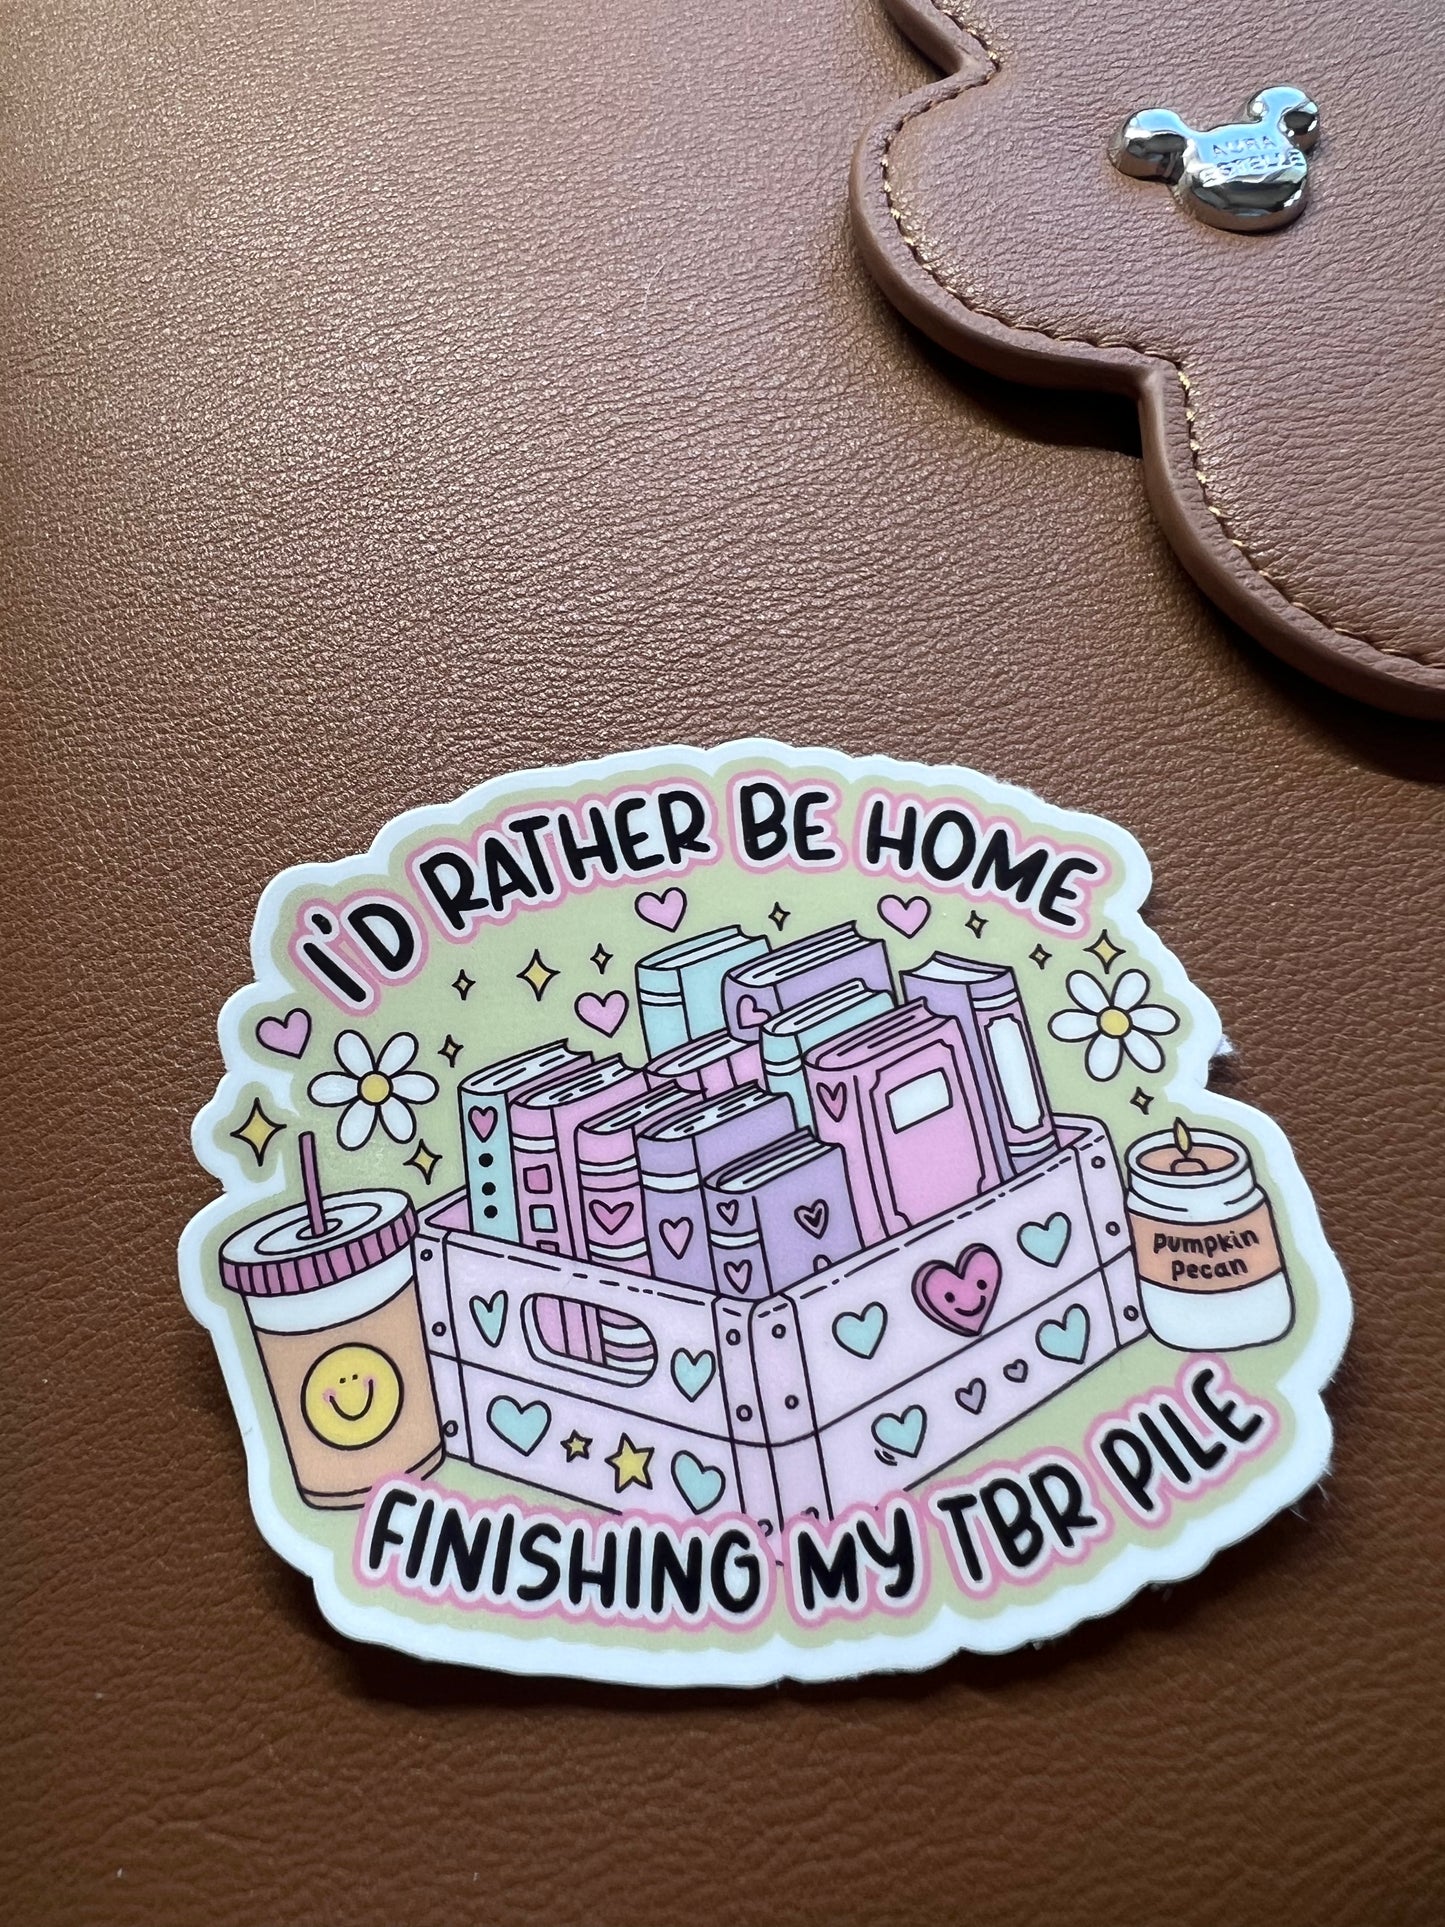 I'd Rather Be Home Finishing my TBR Pile  Die Cut Sticker